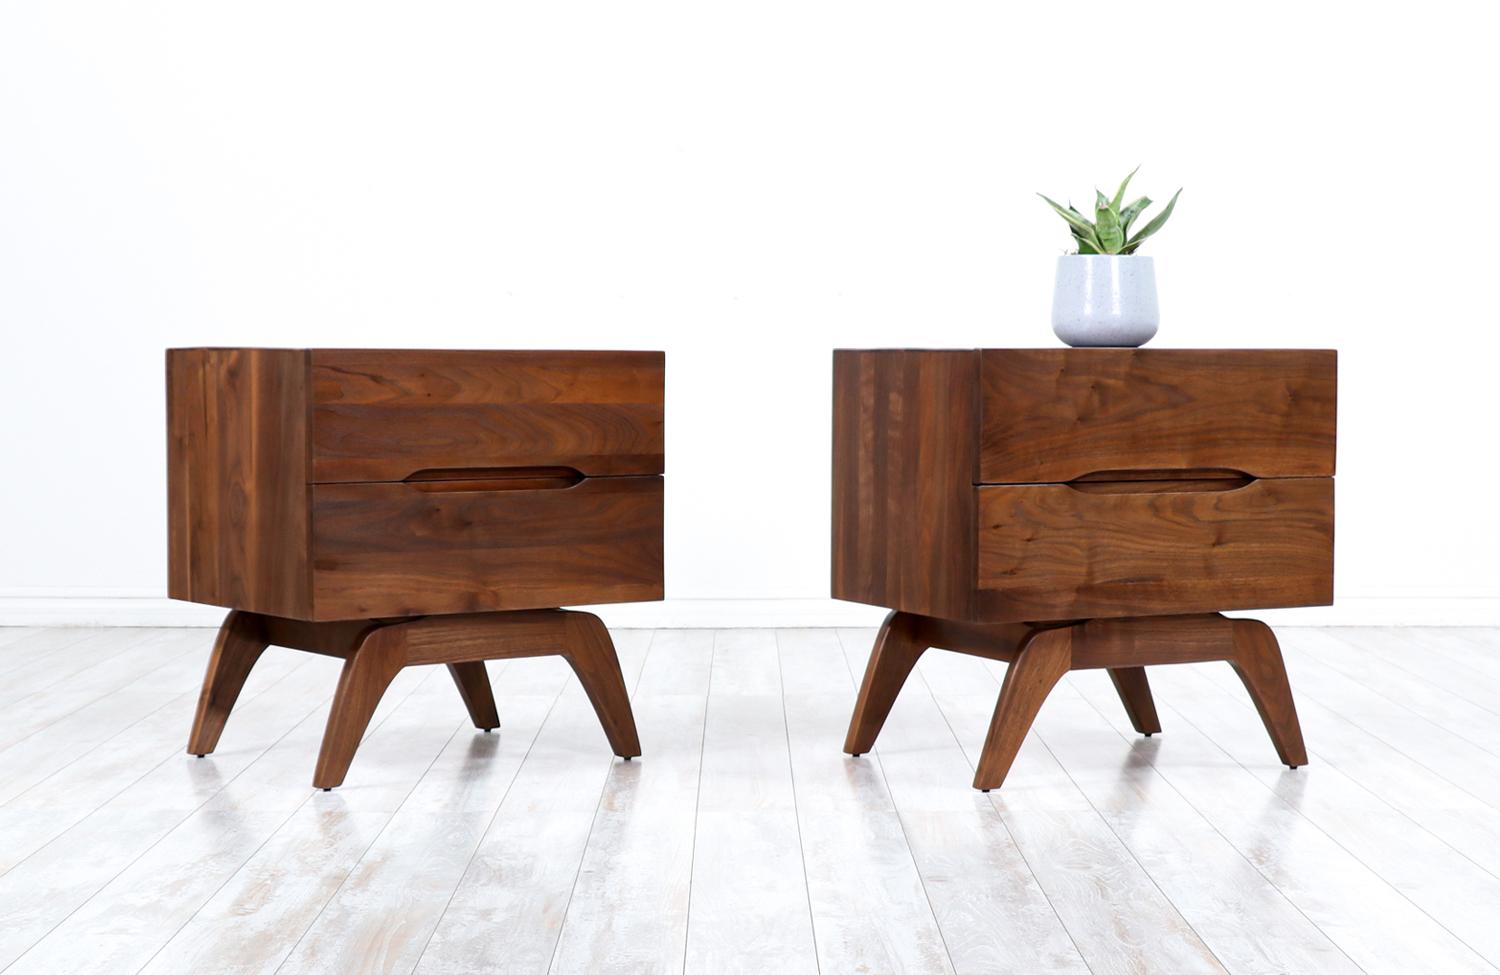 Pair of Mid Century Modern night-stands designed and manufactured in the United States circa 1960’s. These elegant night-stands feature a walnut wood case with two dovetailed drawers with recessed pulls. The boxy case sits on a sculpted base with